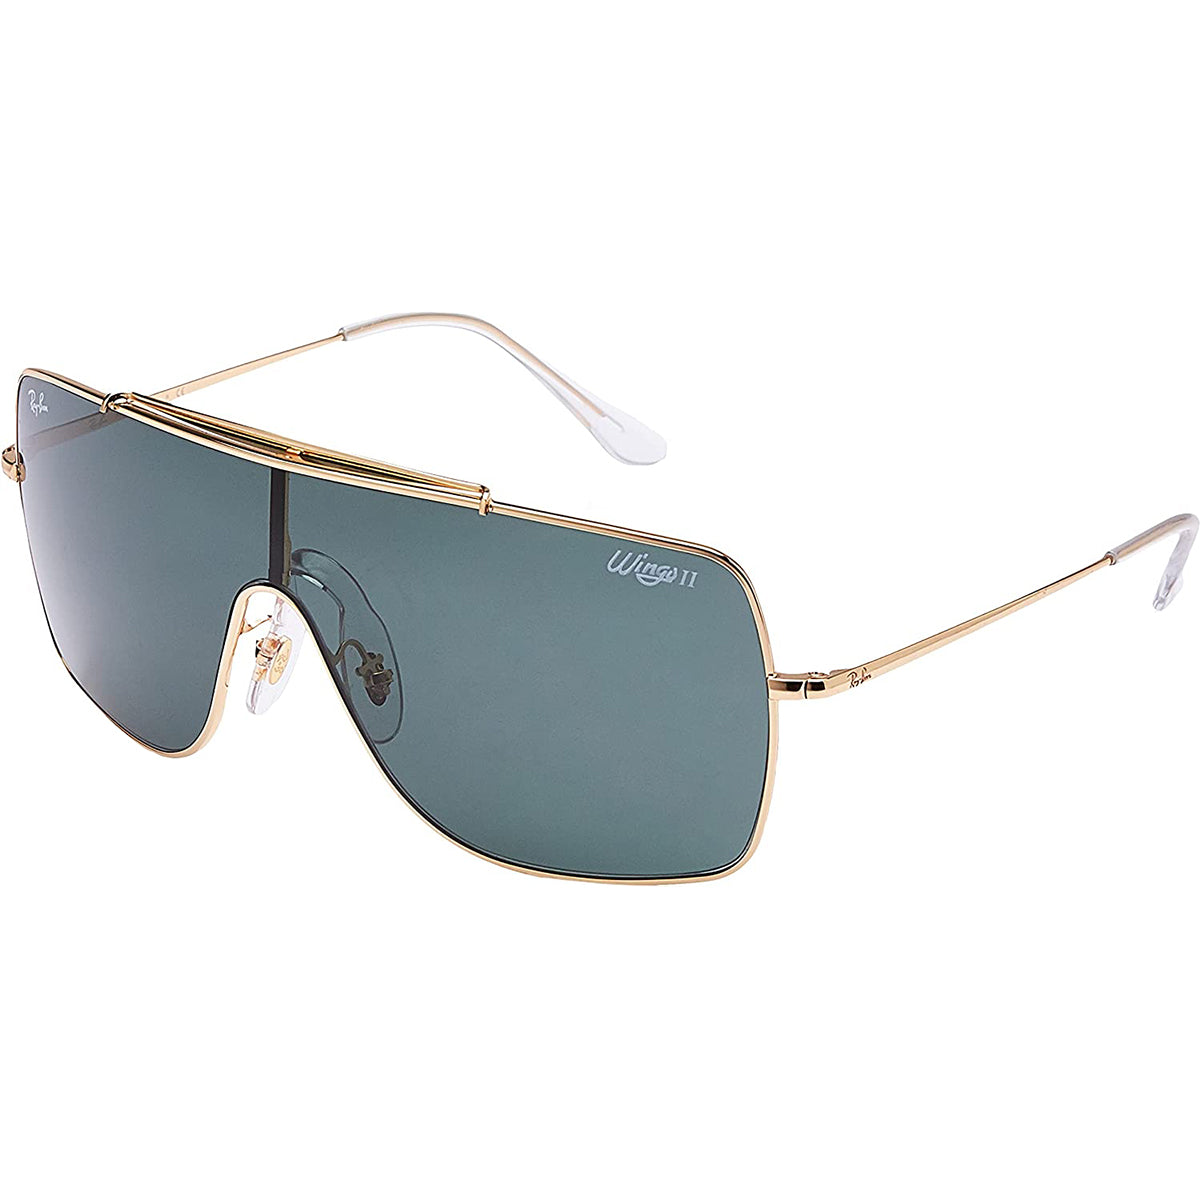 The Ray-ban RB4228 has you covered for that sporty or classy look - YouTube